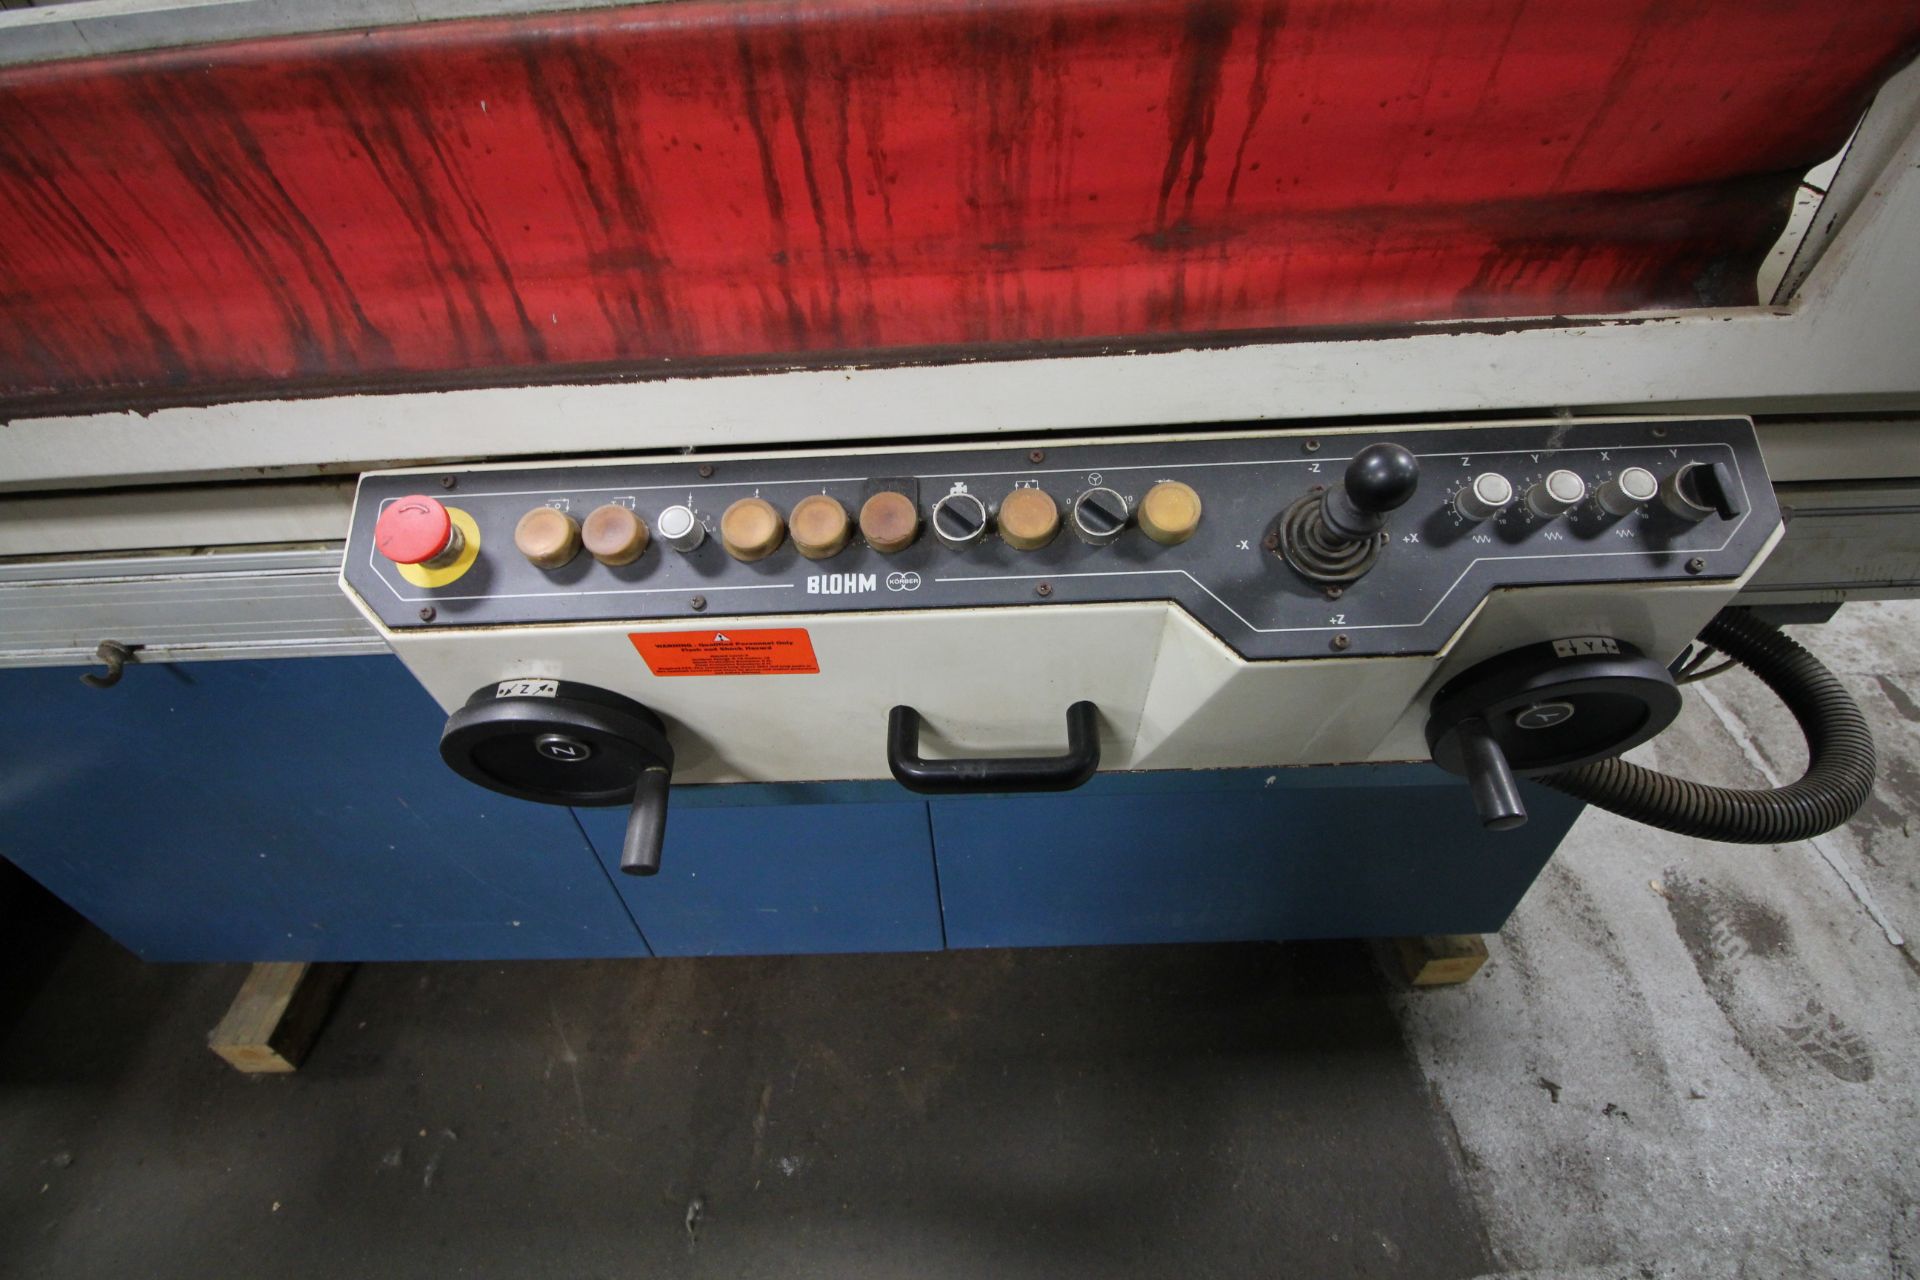 BLOHM PLANOMAT 408 16" X 32" PROGRAMMABLE SURFACE GRINDER, YEAR 1995, SN 14228 - Image 4 of 5